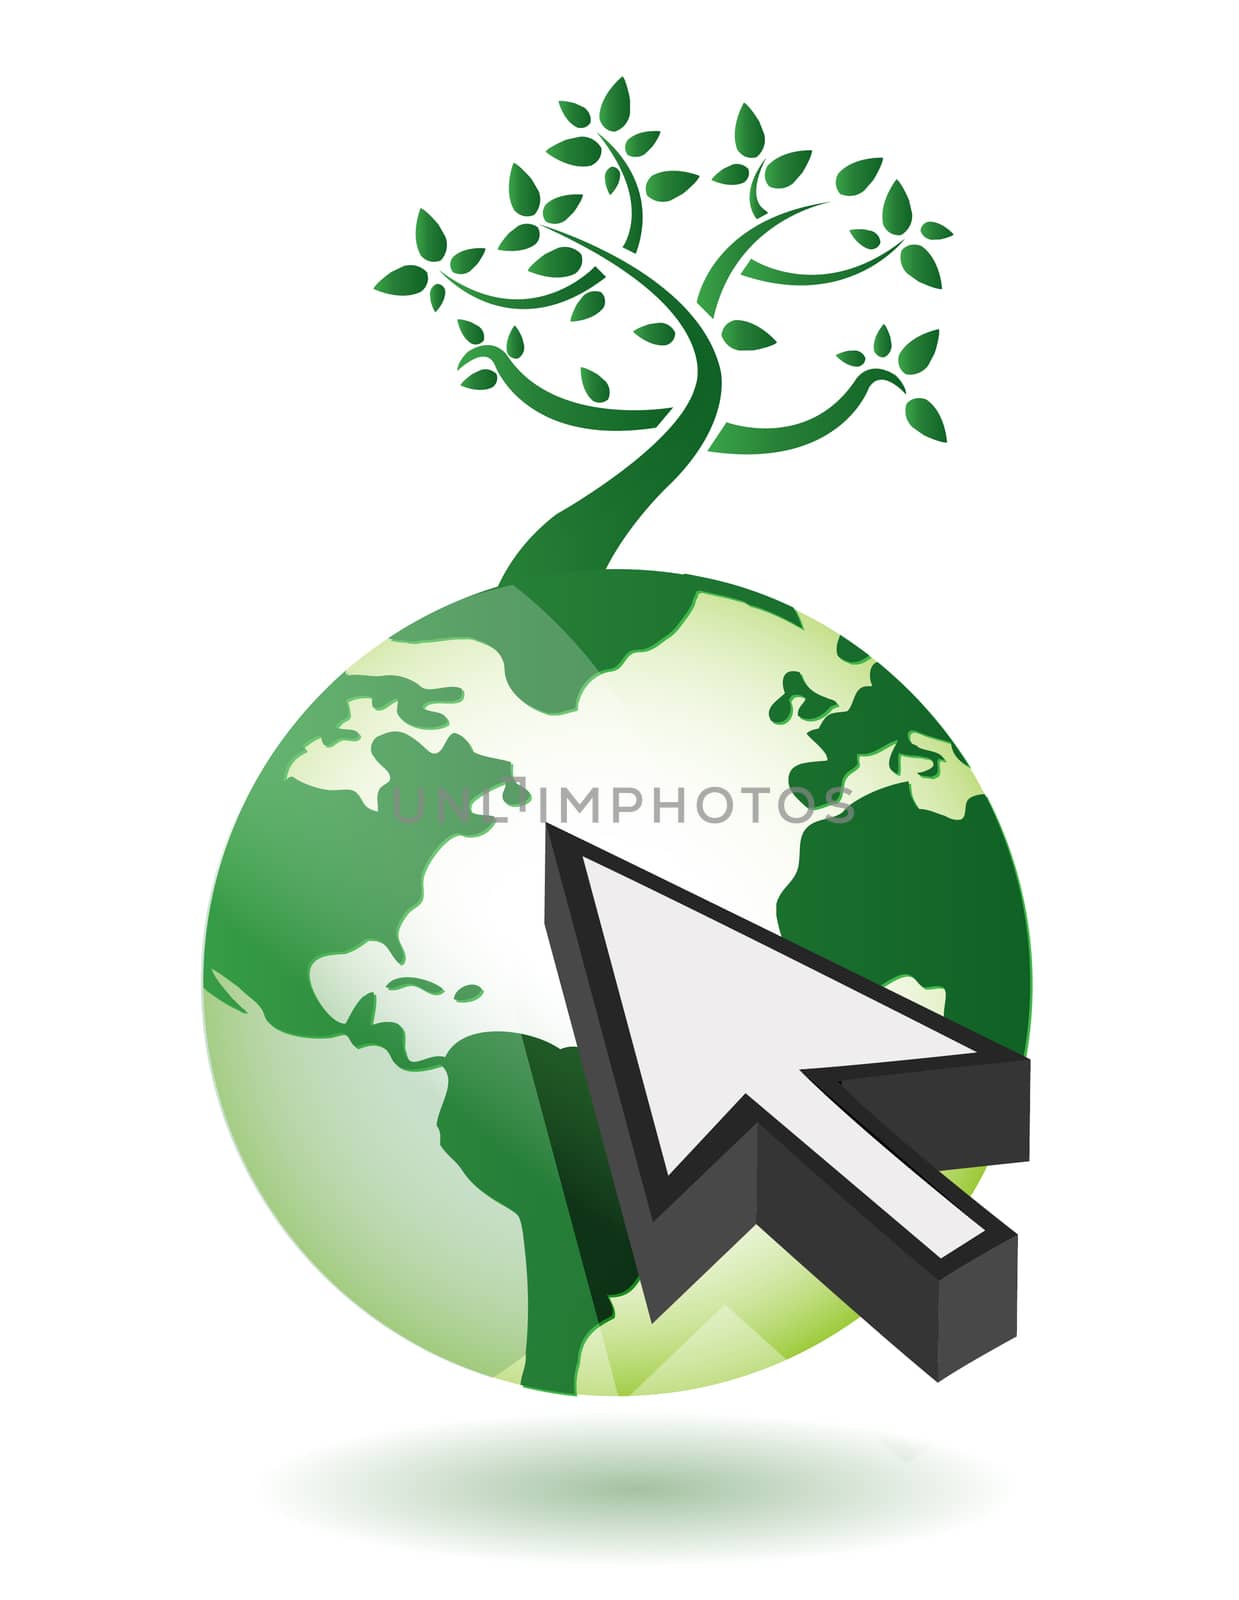 Tree on a globe with an arrow illustration design on white